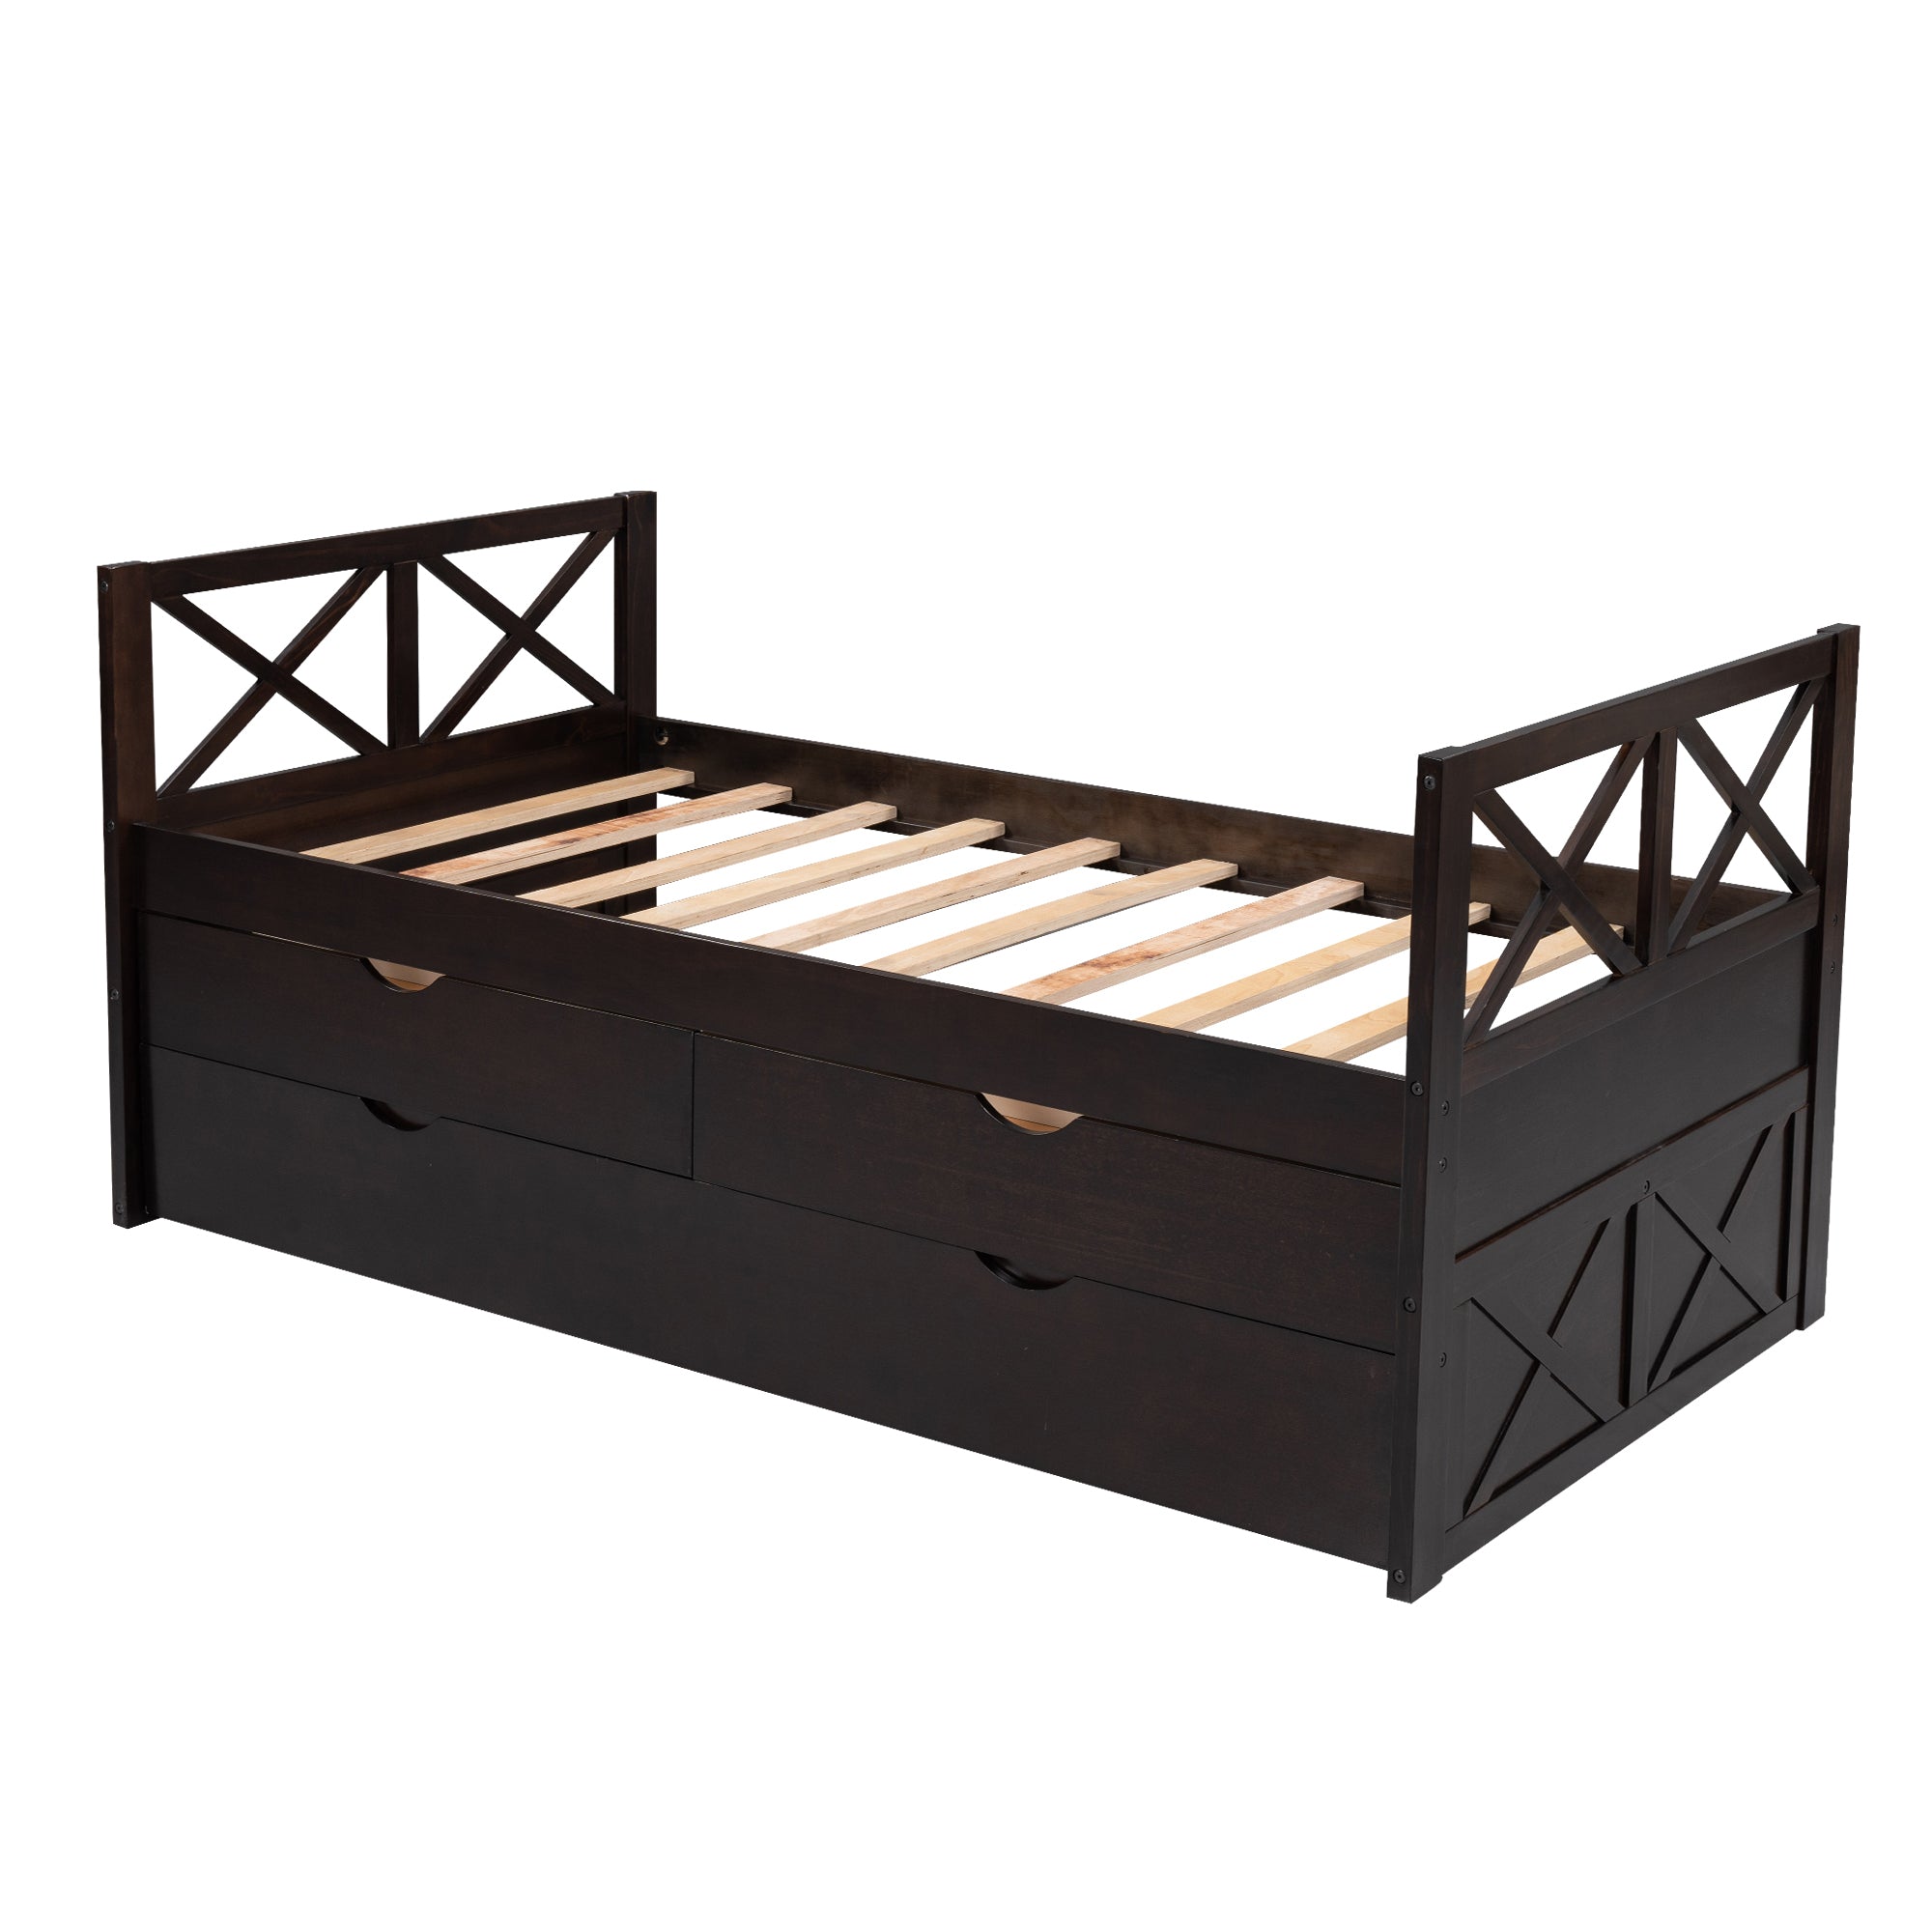 Multi-Functional Daybed with Drawers and Trundle (Espresso)